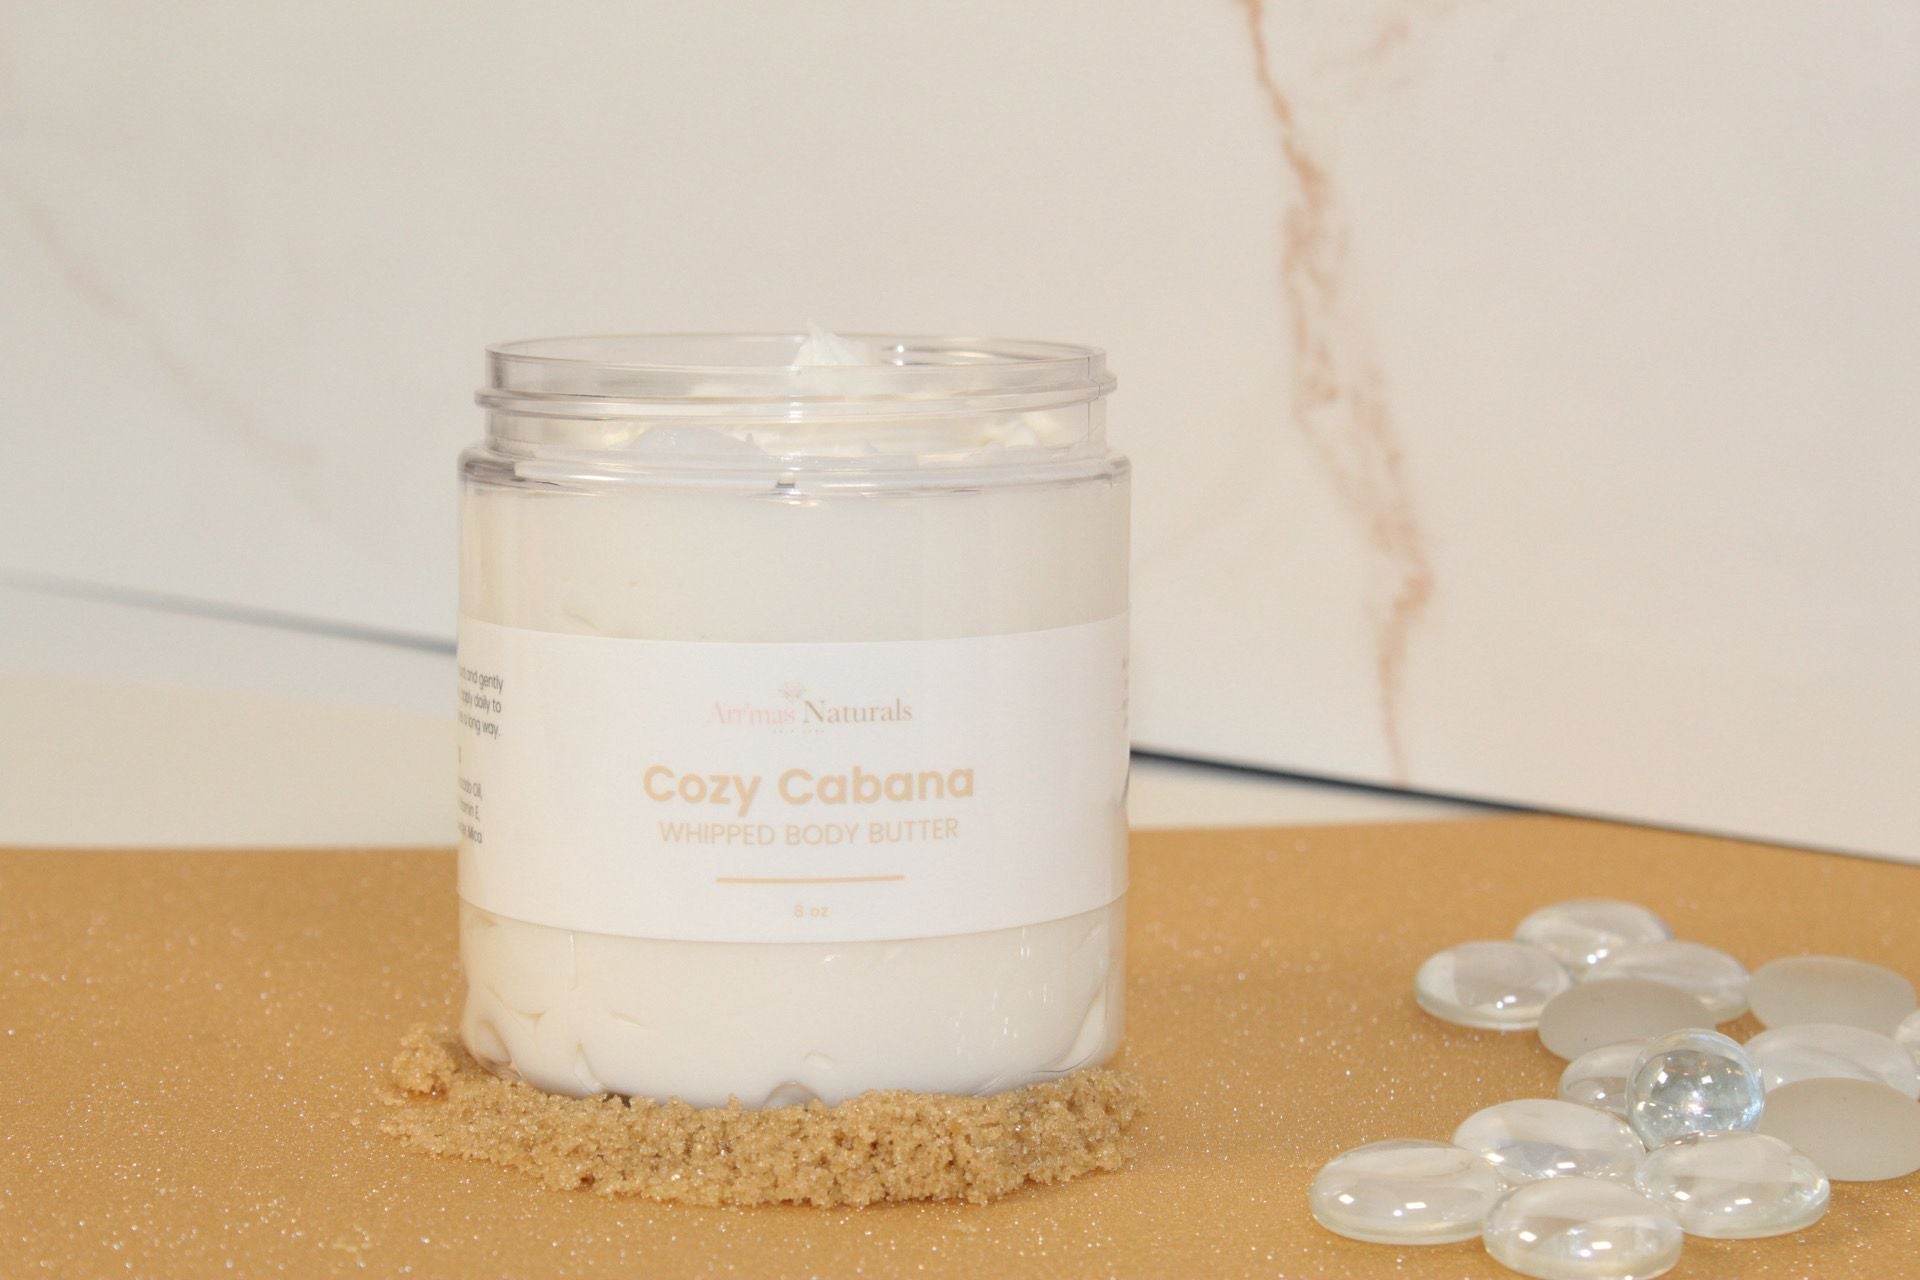 Cozy Cabana Whipped Body Butter